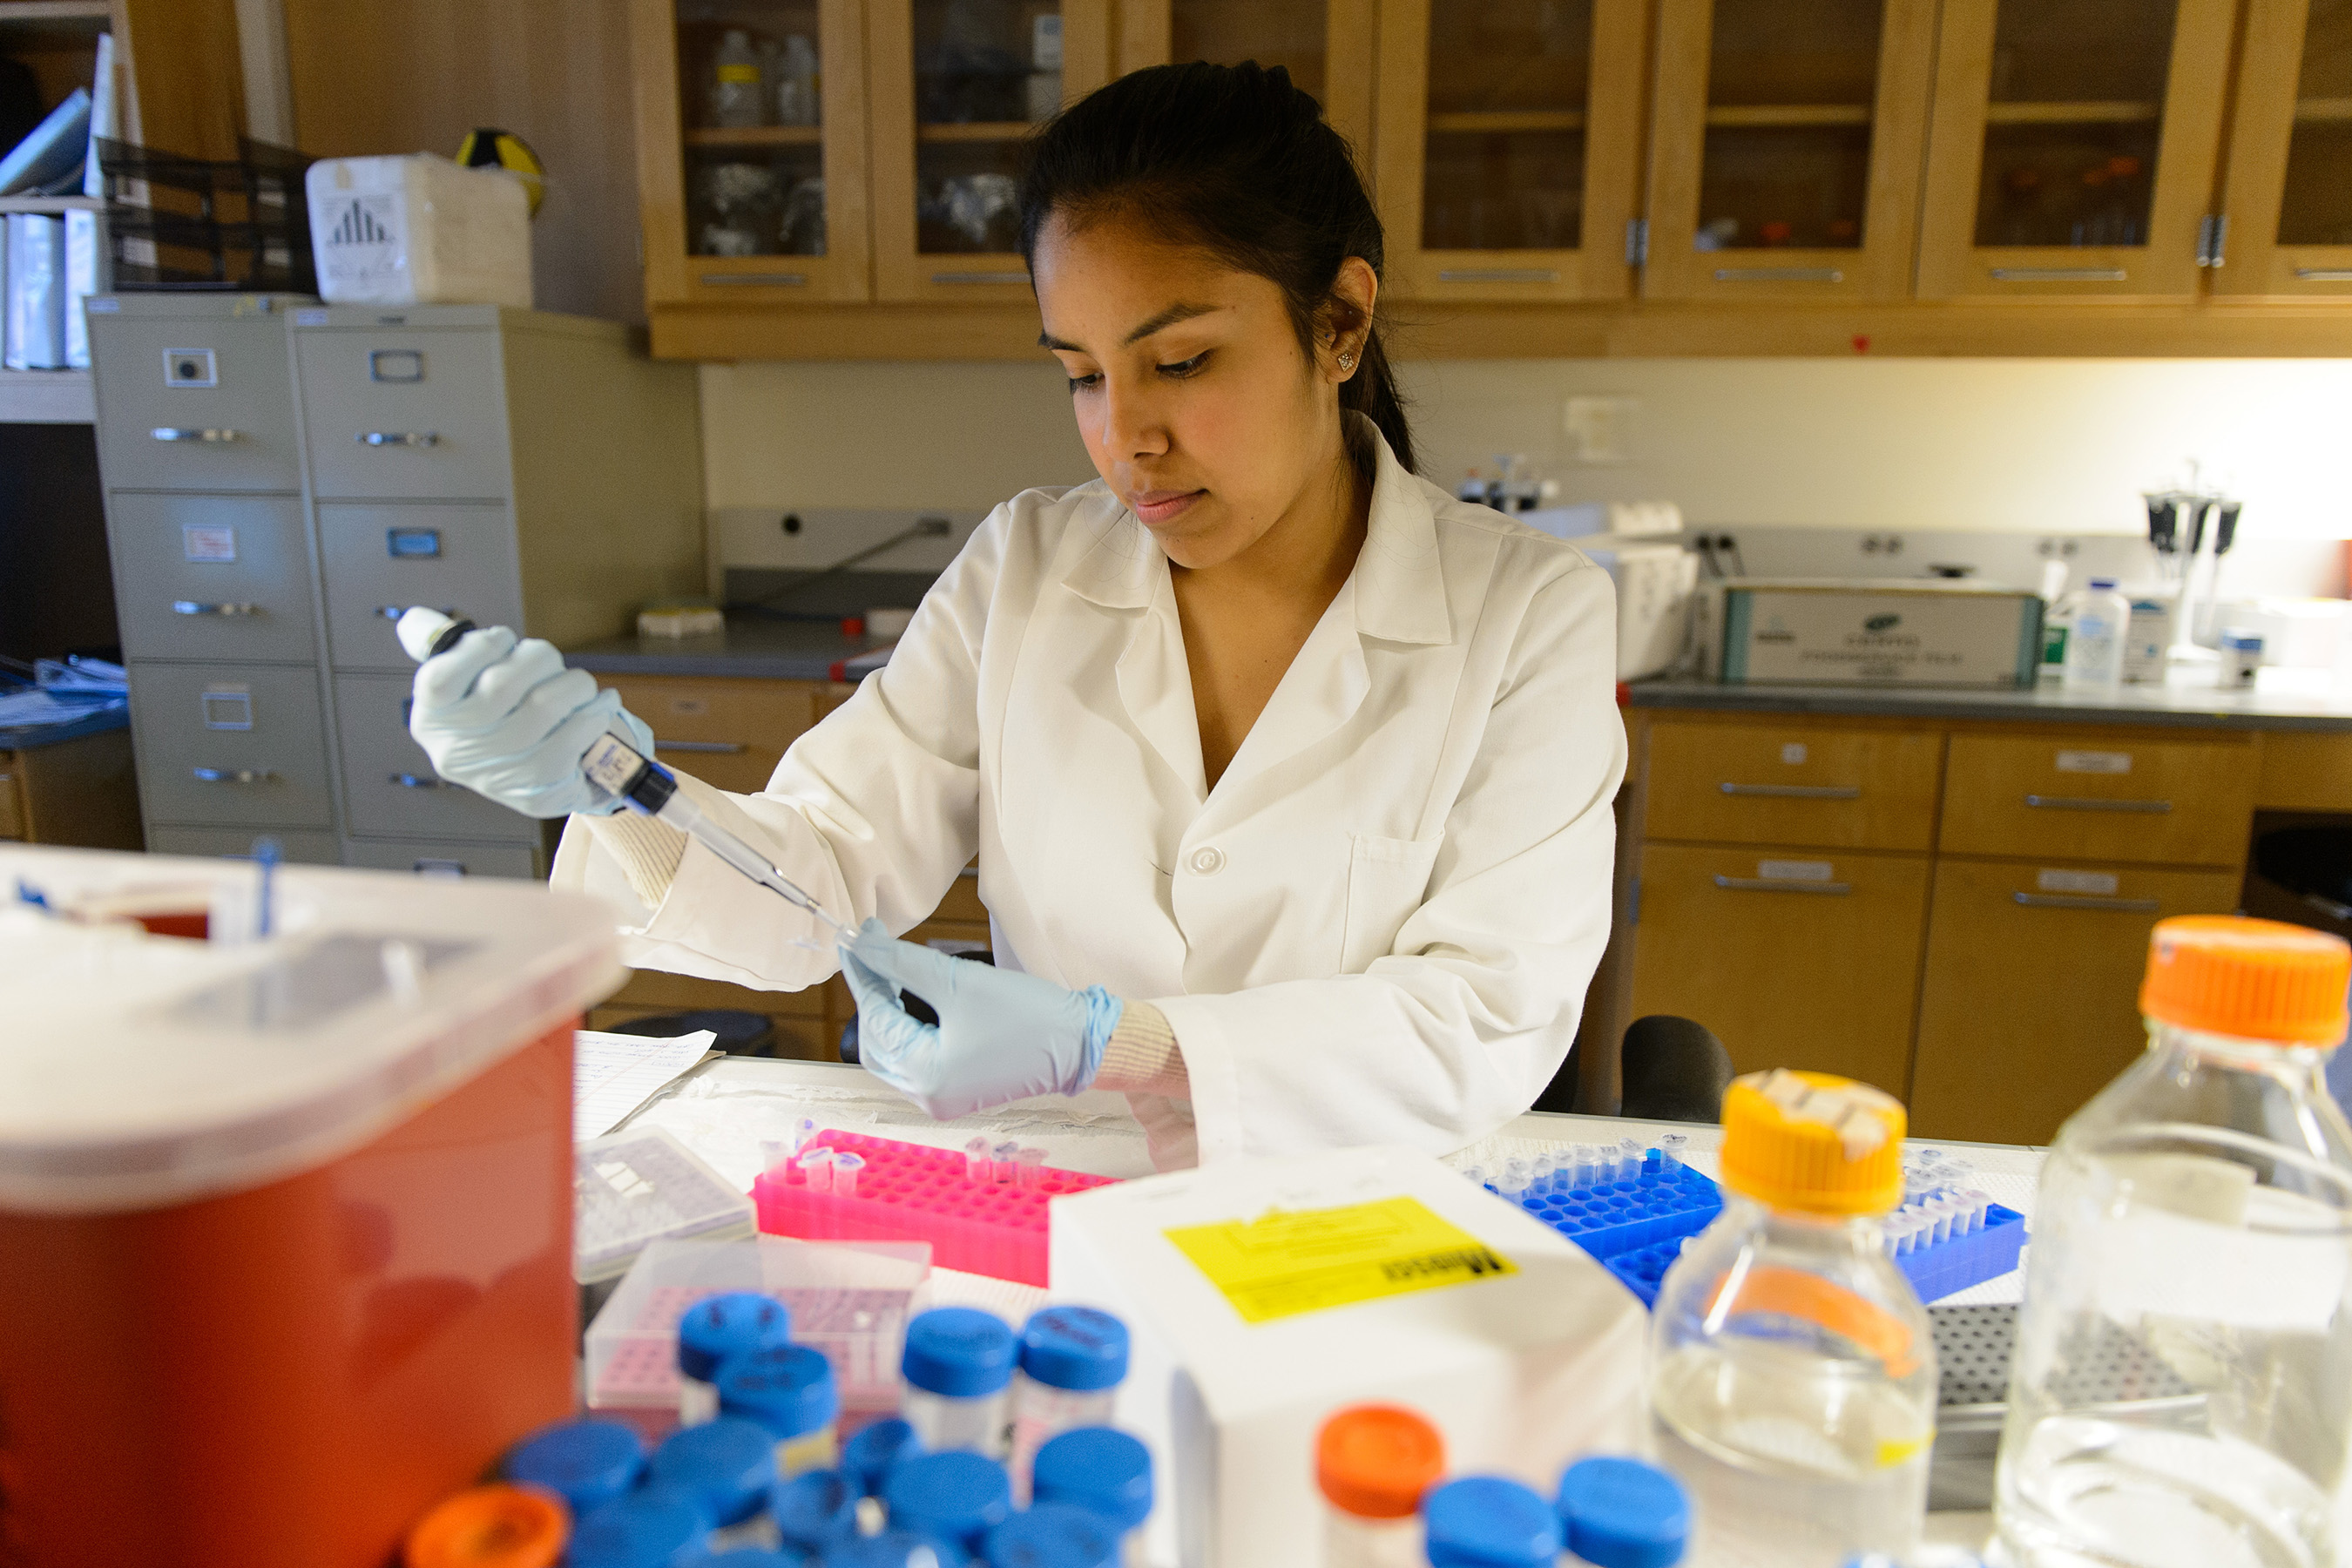 The Amgen Scholars Program provides undergraduates with hands-on summer research opportunities at many of the world's premier educational institutions.